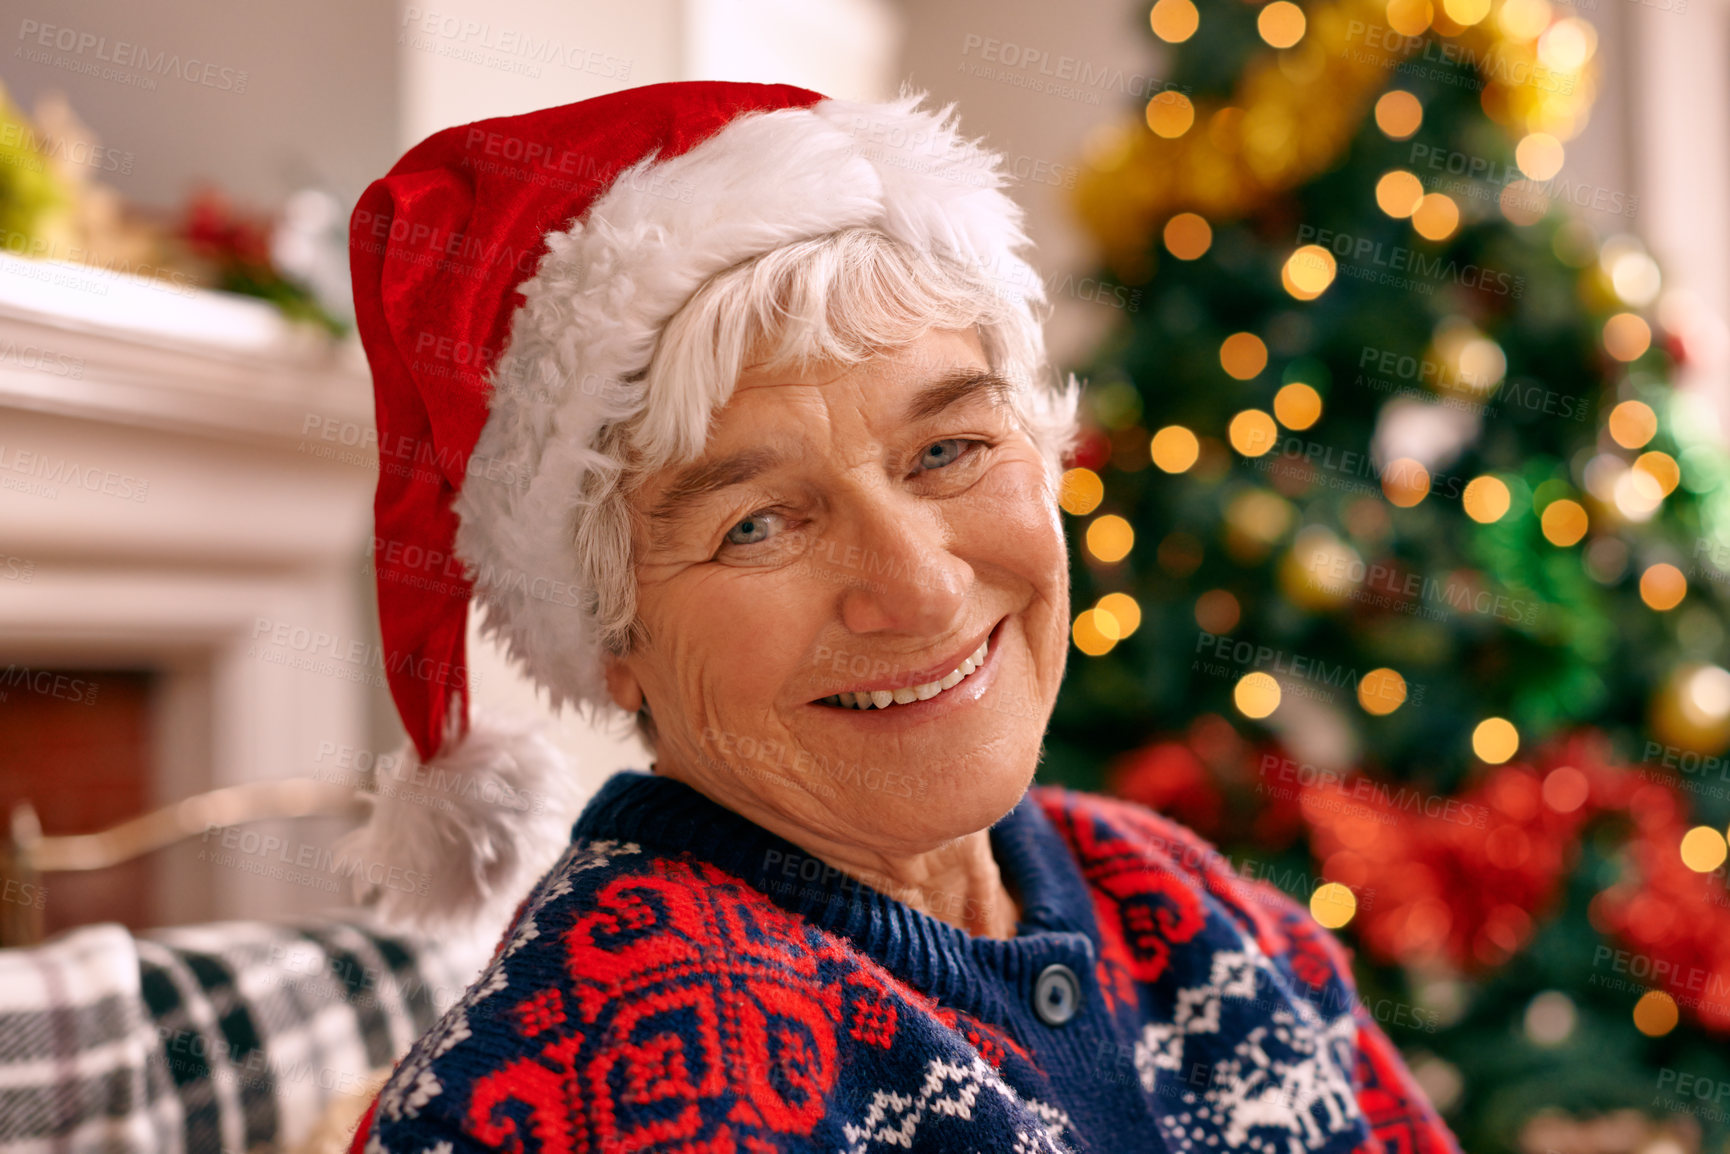 Buy stock photo A senior woman sitting inside wearing a Christmas hat